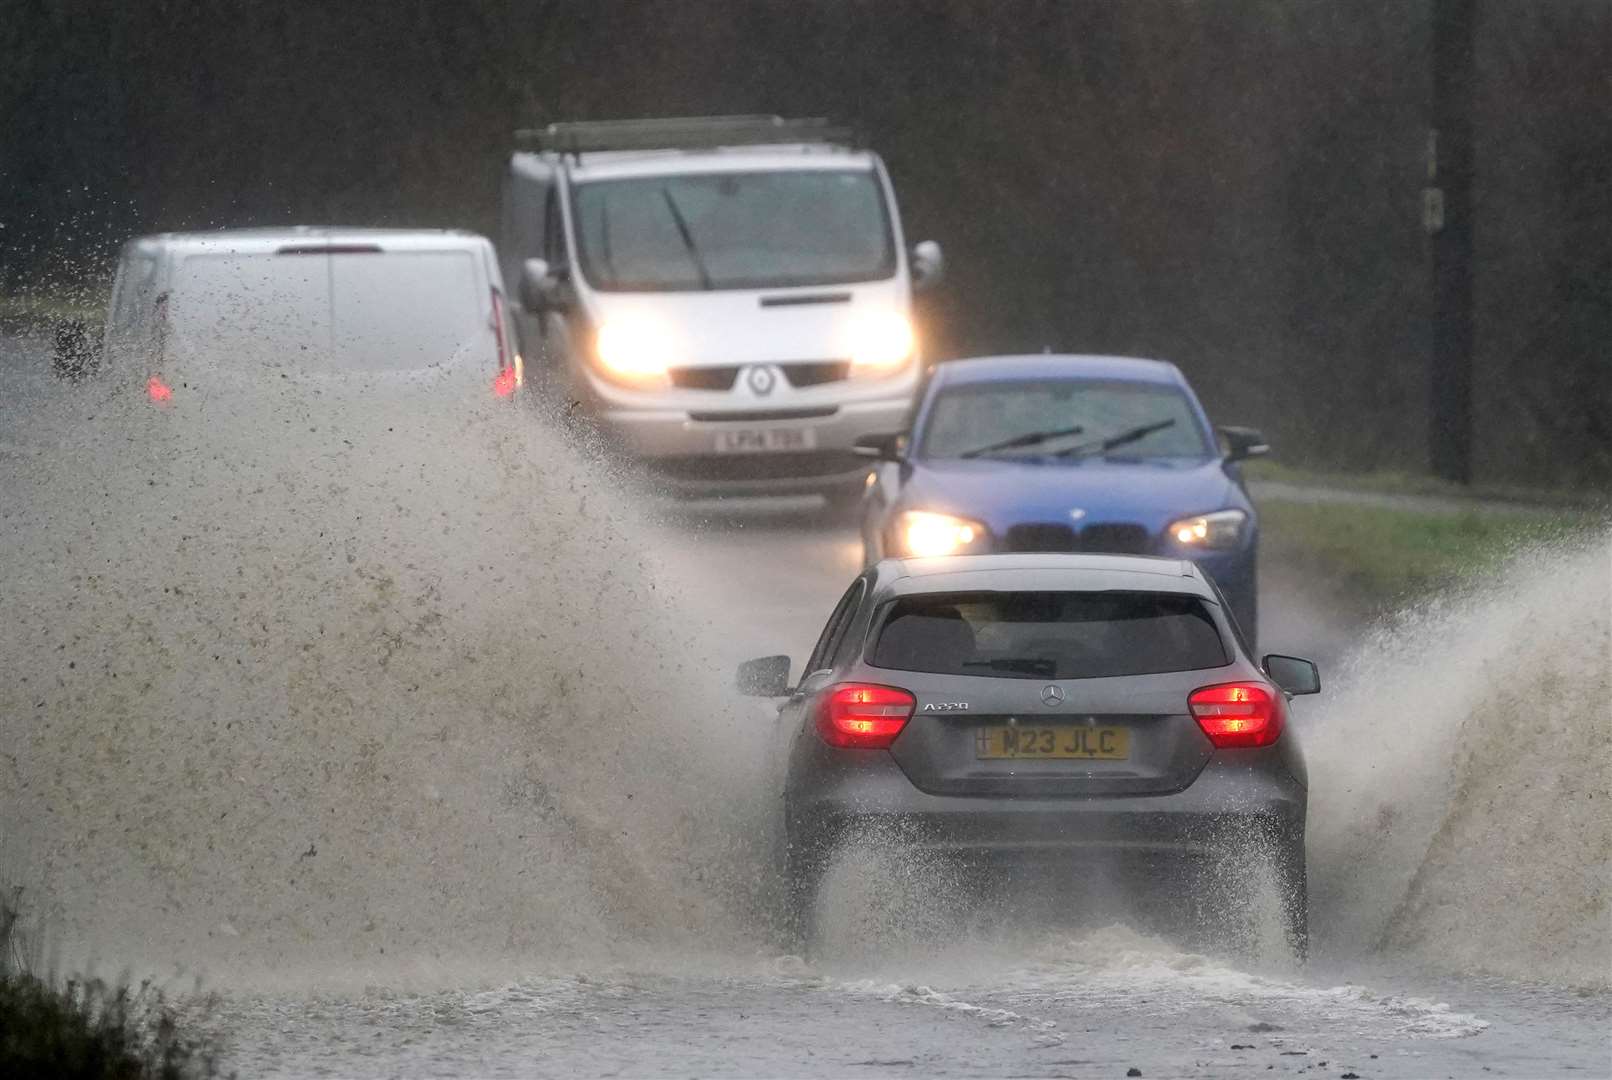 Drivers faced difficult driving conditions near Folkestone in Kent (Gareth Fuller/PA)